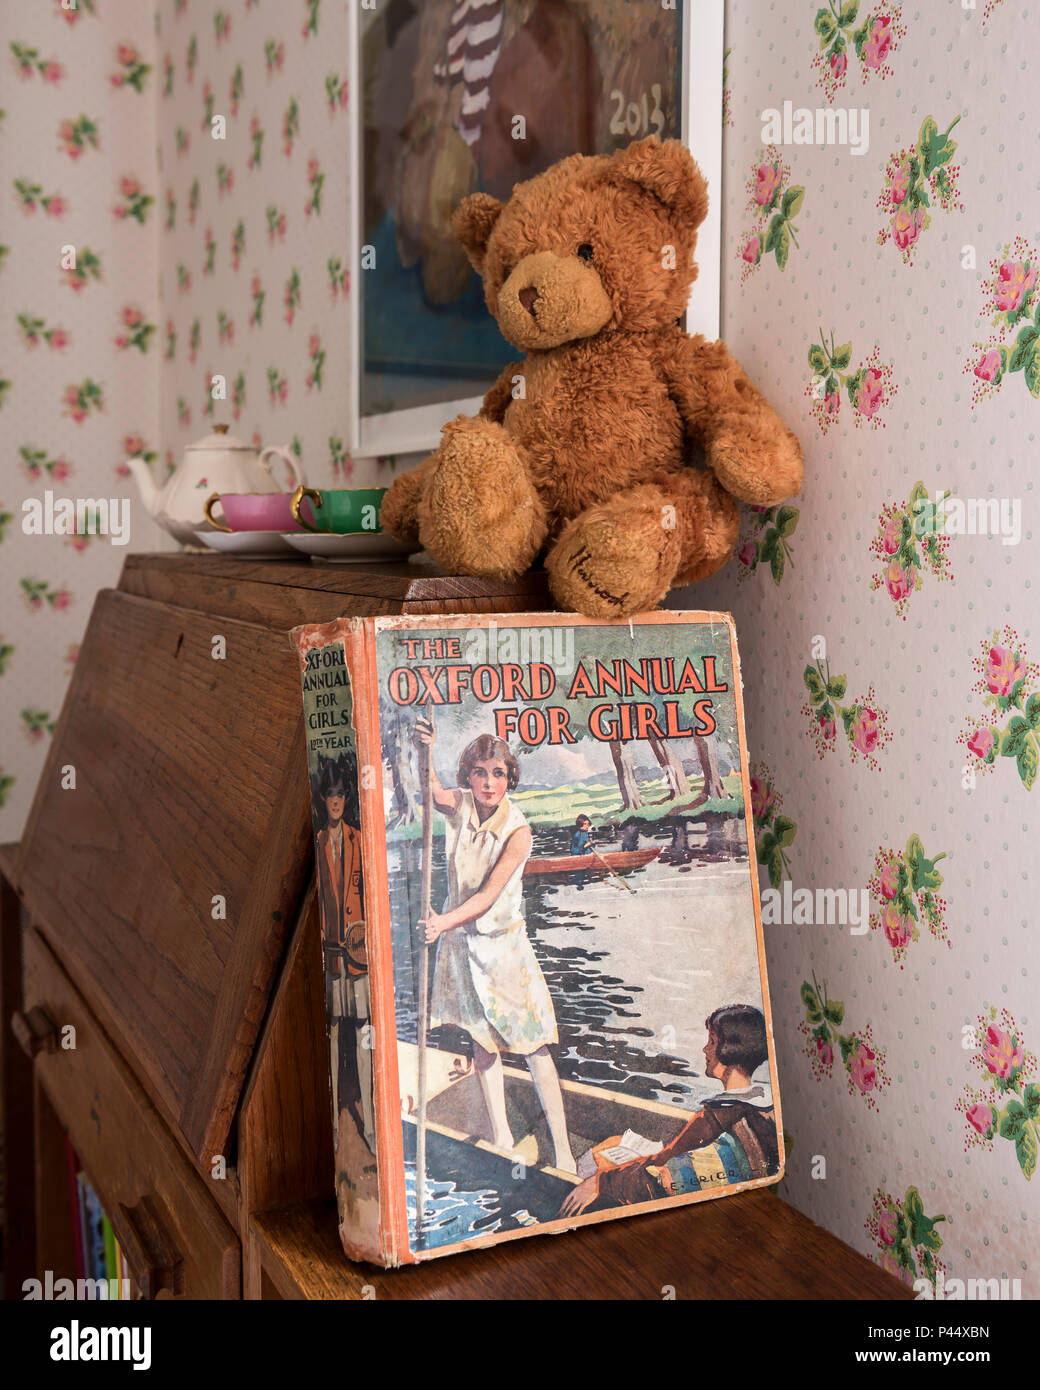 Teddybear and book on vintage desk in girls room Stock Photo